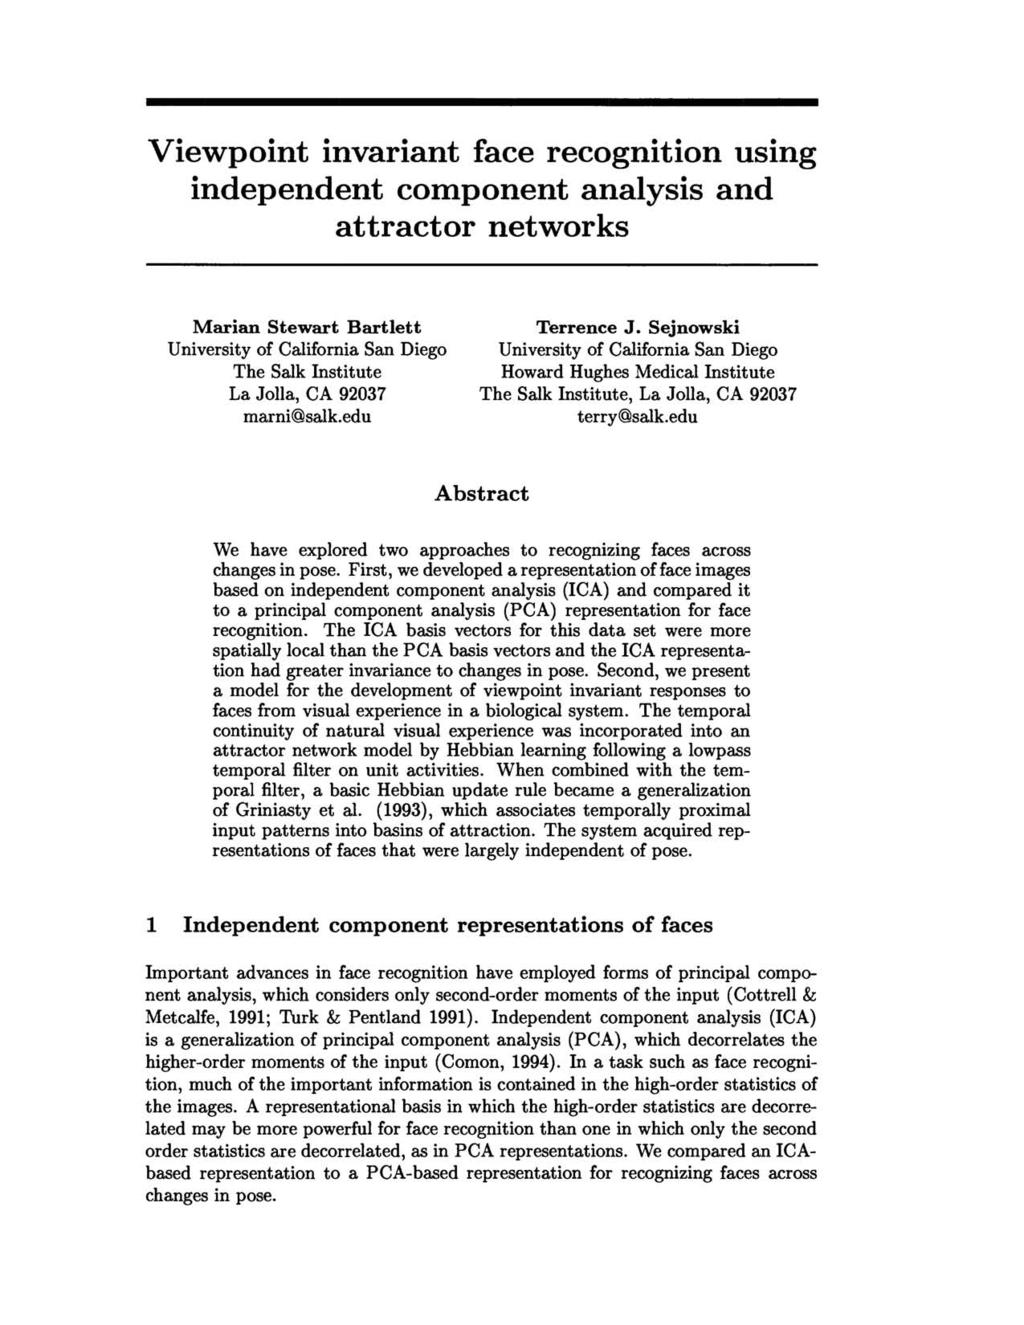 Viewpoint invariant face recognition using independent component analysis and attractor networks Marian Stewart Bartlett University of California San Diego The Salk Institute La Jolla, CA 92037